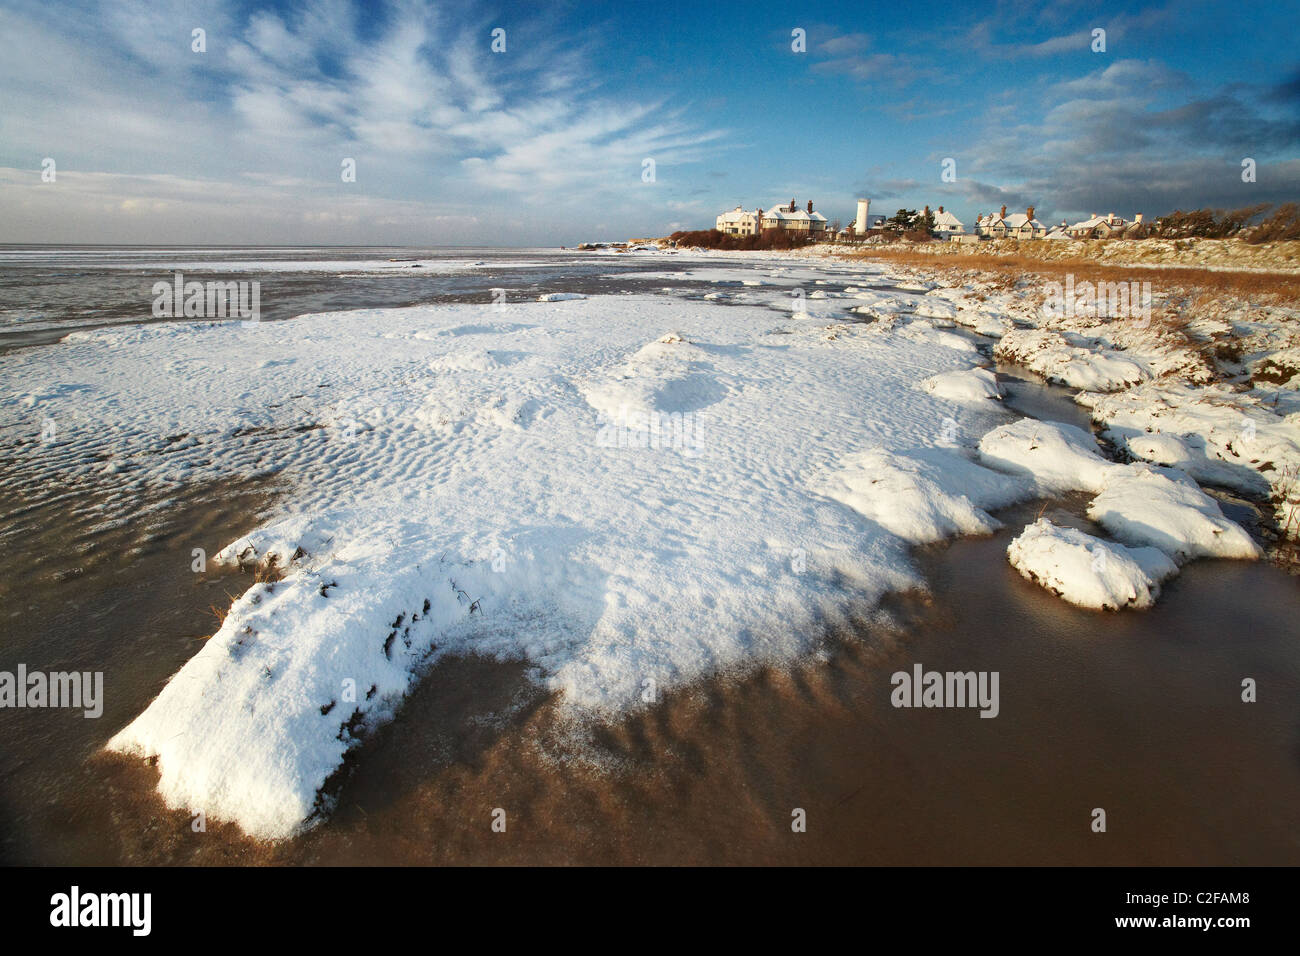 Snow covers the beach at Red Rocks. Hoylake, Wirral, Merseyside, UK Stock Photo